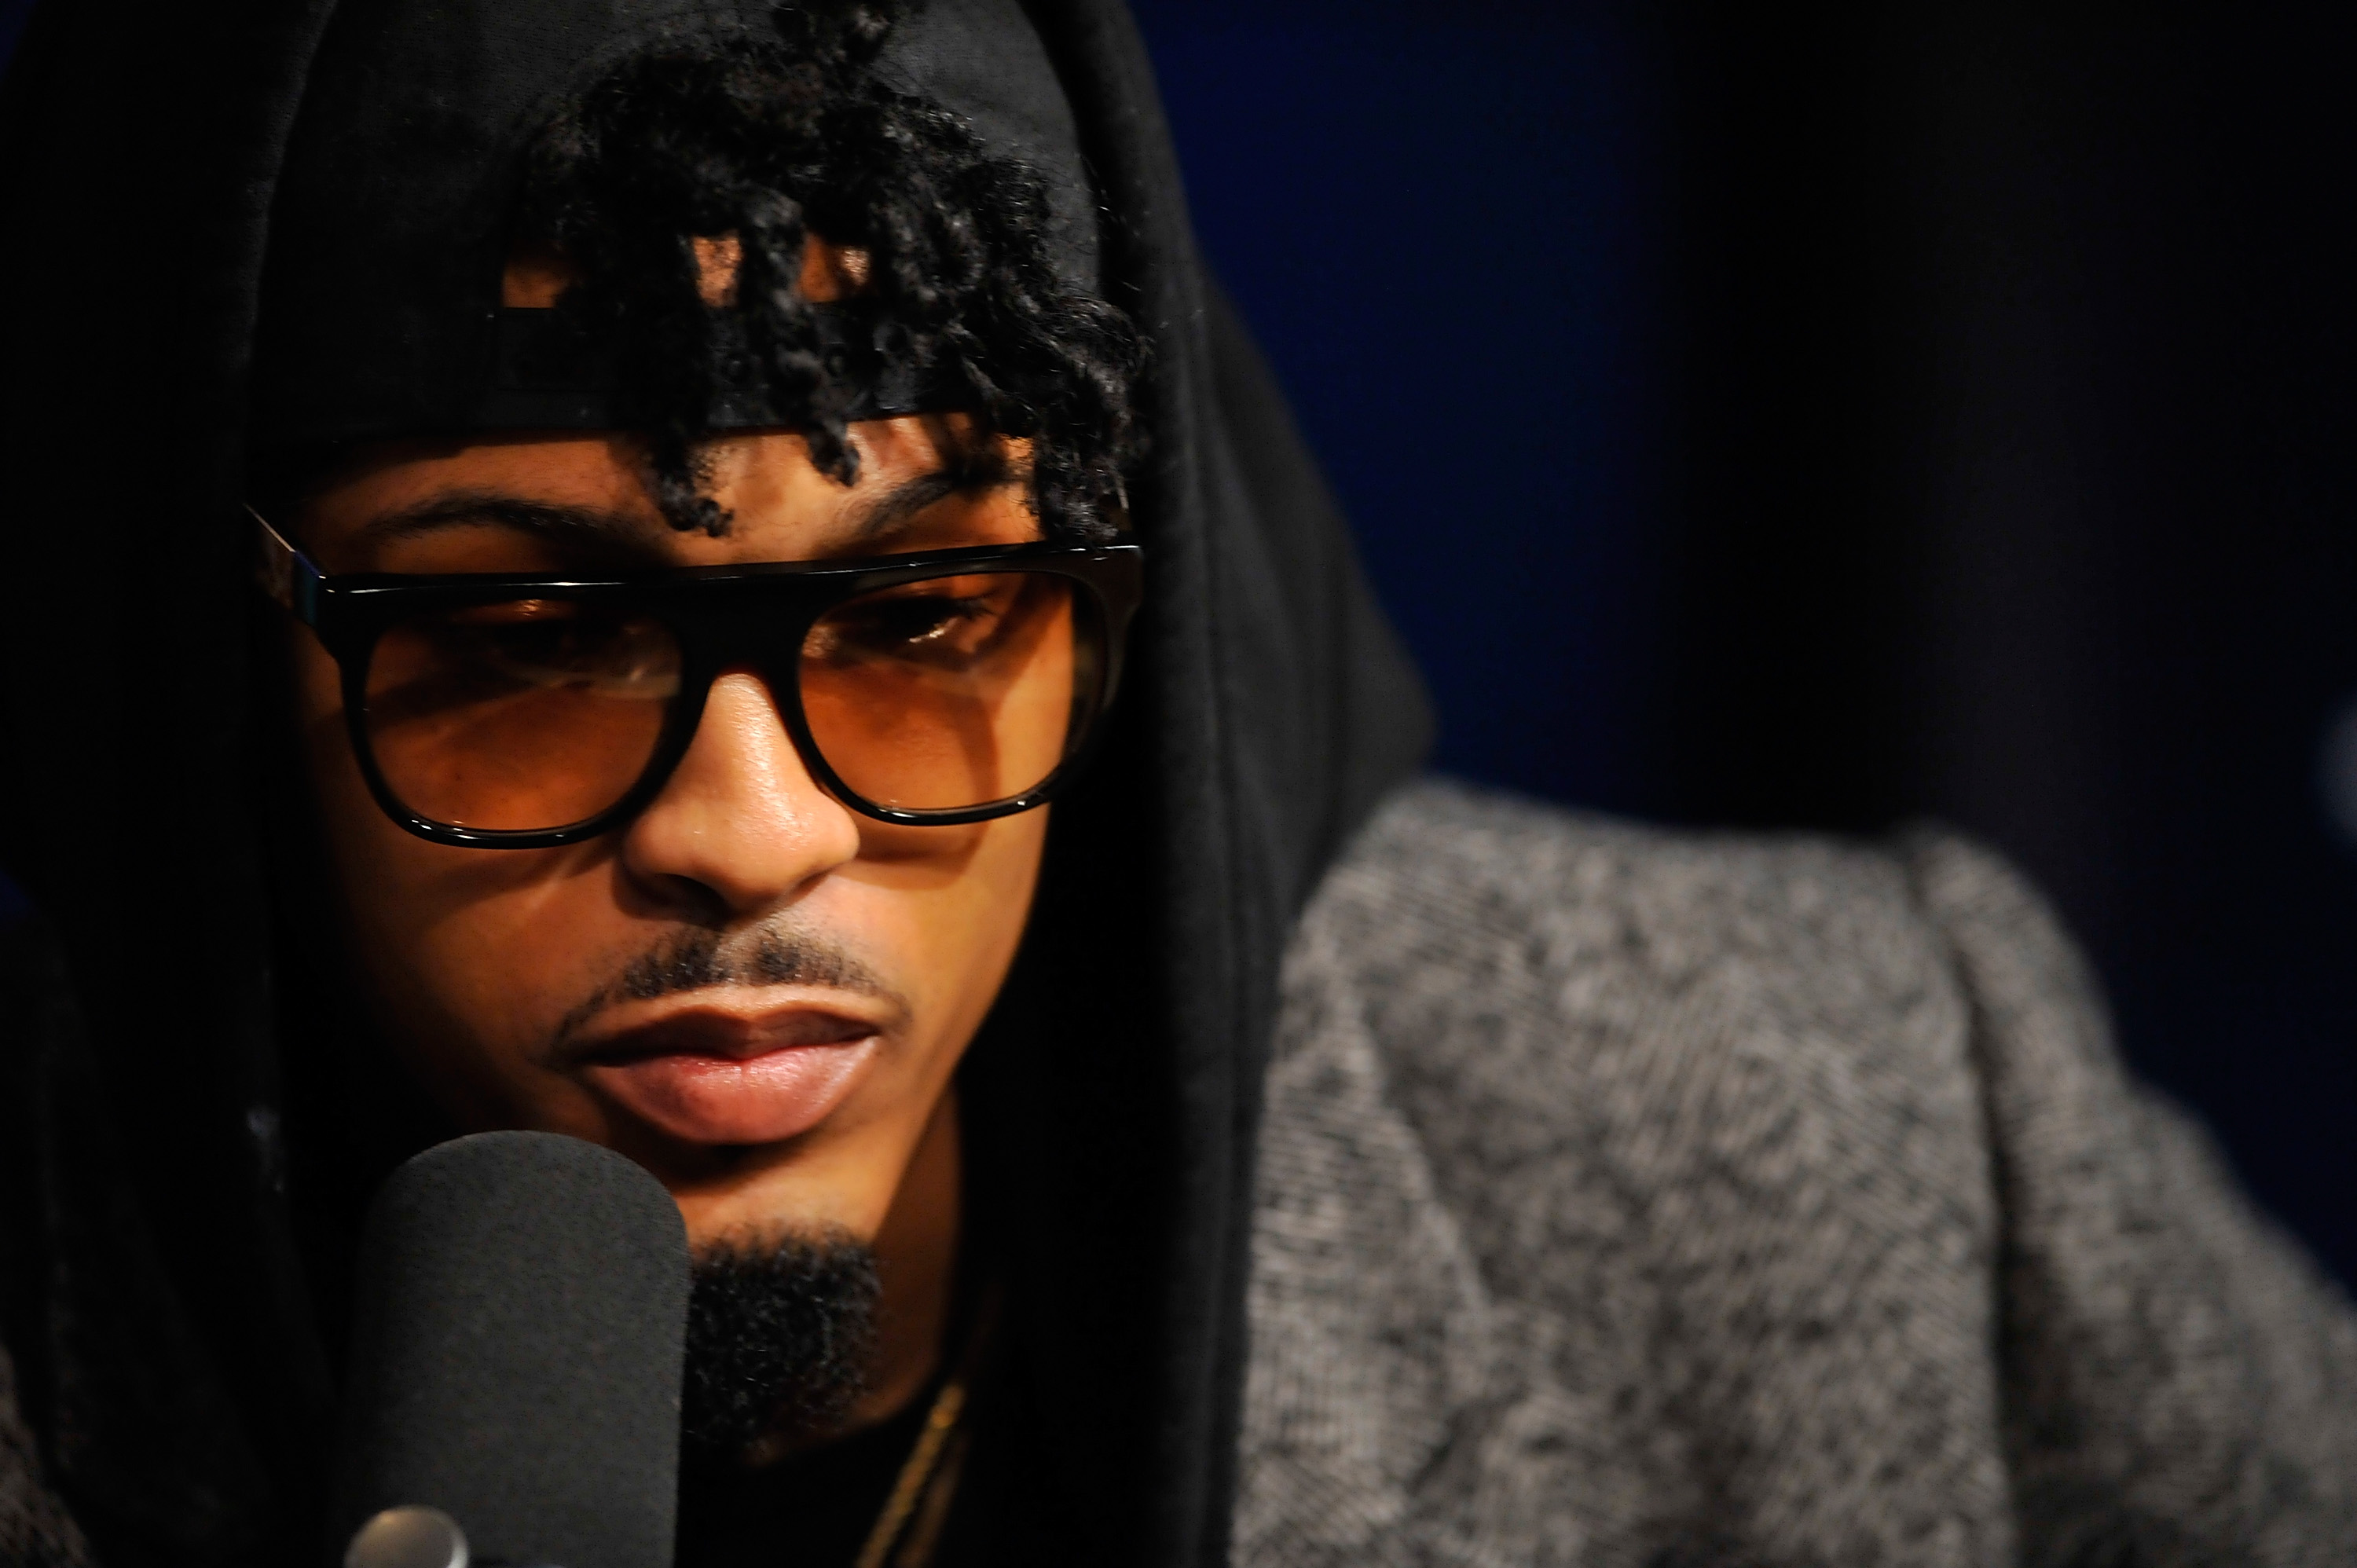 August Alsina is interviewed by DJ Chris Styles during SiriusXM Studios The Heat at SiriusXM Studio on December 14, 2015, in Washington, DC. | Source: Getty Images